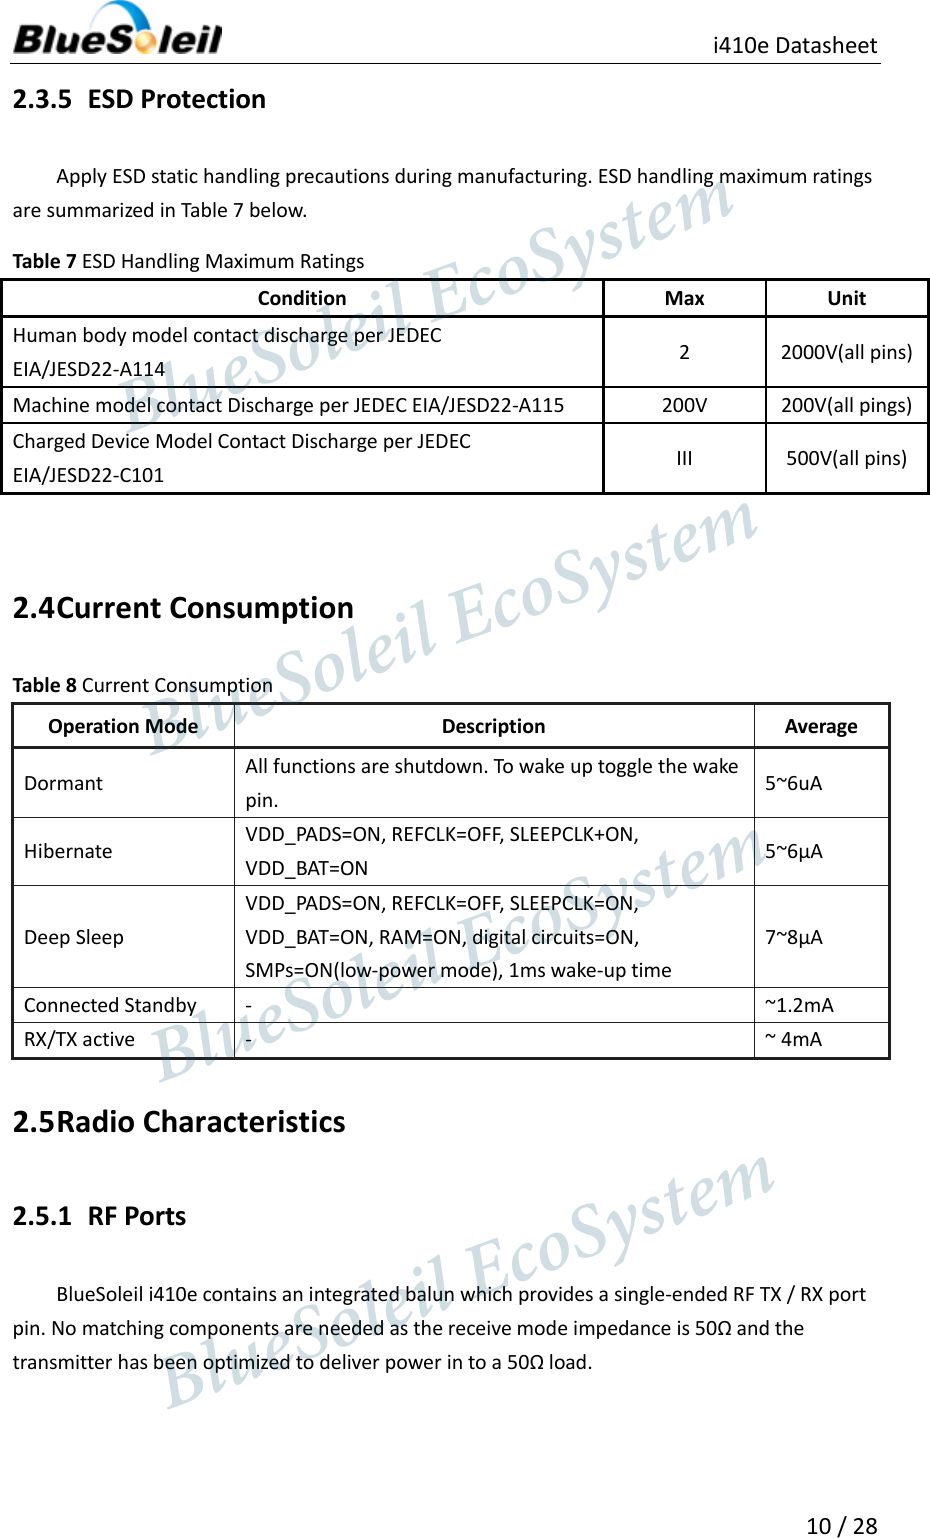                                               i410e Datasheet  10 / 28  2.3.5 ESD Protection Apply ESD static handling precautions during manufacturing. ESD handling maximum ratings are summarized in Table 7 below. Table 7 ESD Handling Maximum Ratings Condition Max Unit Human body model contact discharge per JEDEC EIA/JESD22-A114 2 2000V(all pins) Machine model contact Discharge per JEDEC EIA/JESD22-A115 200V 200V(all pings) Charged Device Model Contact Discharge per JEDEC EIA/JESD22-C101 III 500V(all pins)  2.4 Current Consumption Table 8 Current Consumption Operation Mode Description Average Dormant All functions are shutdown. To wake up toggle the wake pin. 5~6uA Hibernate VDD_PADS=ON, REFCLK=OFF, SLEEPCLK+ON, VDD_BAT=ON 5~6µA Deep Sleep VDD_PADS=ON, REFCLK=OFF, SLEEPCLK=ON, VDD_BAT=ON, RAM=ON, digital circuits=ON, SMPs=ON(low-power mode), 1ms wake-up time 7~8µA   Connected Standby - ~1.2mA RX/TX active - ~ 4mA 2.5 Radio Characteristics 2.5.1 RF Ports BlueSoleil i410e contains an integrated balun which provides a single-ended RF TX / RX port pin. No matching components are needed as the receive mode impedance is 50Ω and the transmitter has been optimized to deliver power in to a 50Ω load.                  BlueSoleil EcoSystem            BlueSoleil EcoSystem      BlueSoleil EcoSystemBlueSoleil EcoSystem